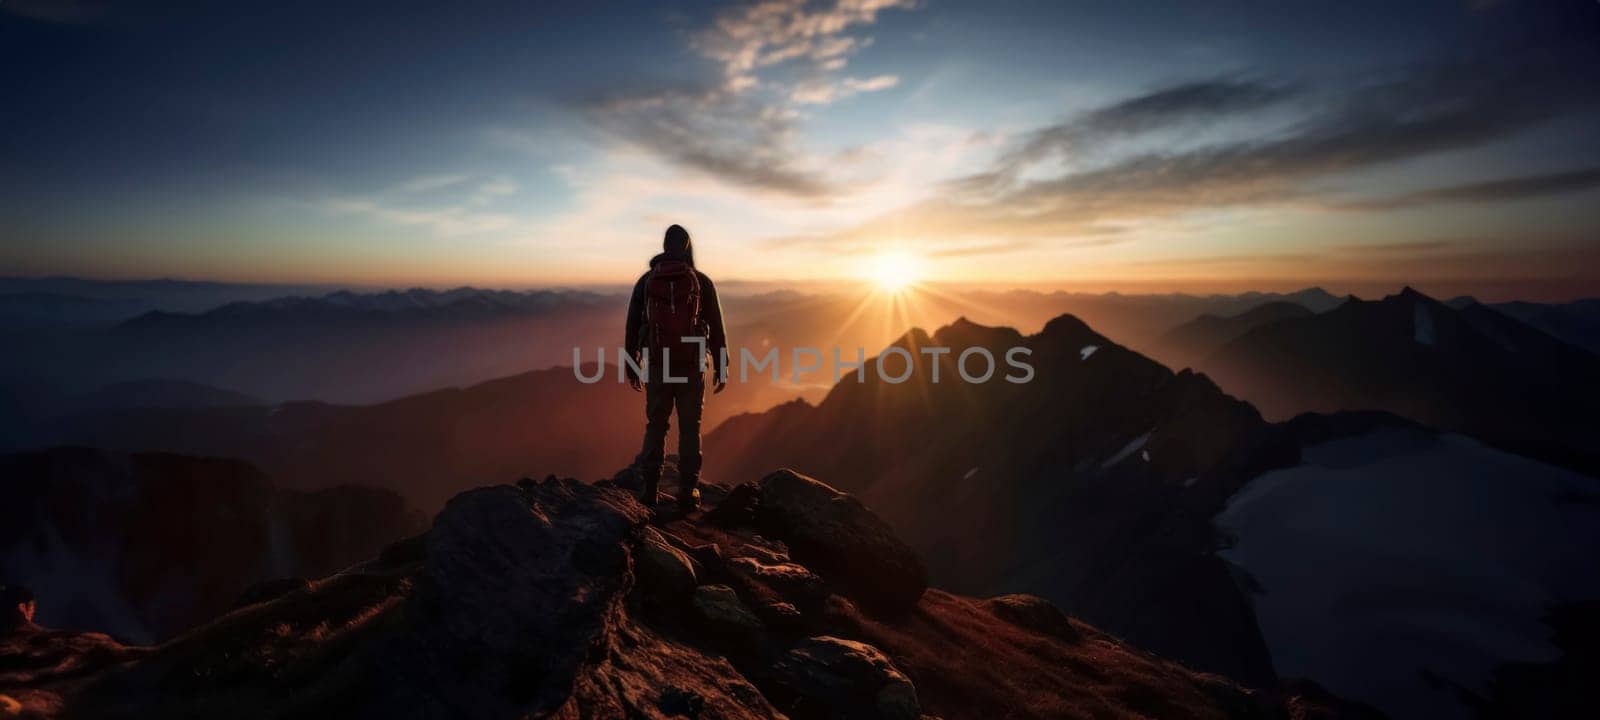 Adventurer standing on mountain peak at sunrise. Exploration and adventure concept. Nature and wilderness theme for design and print